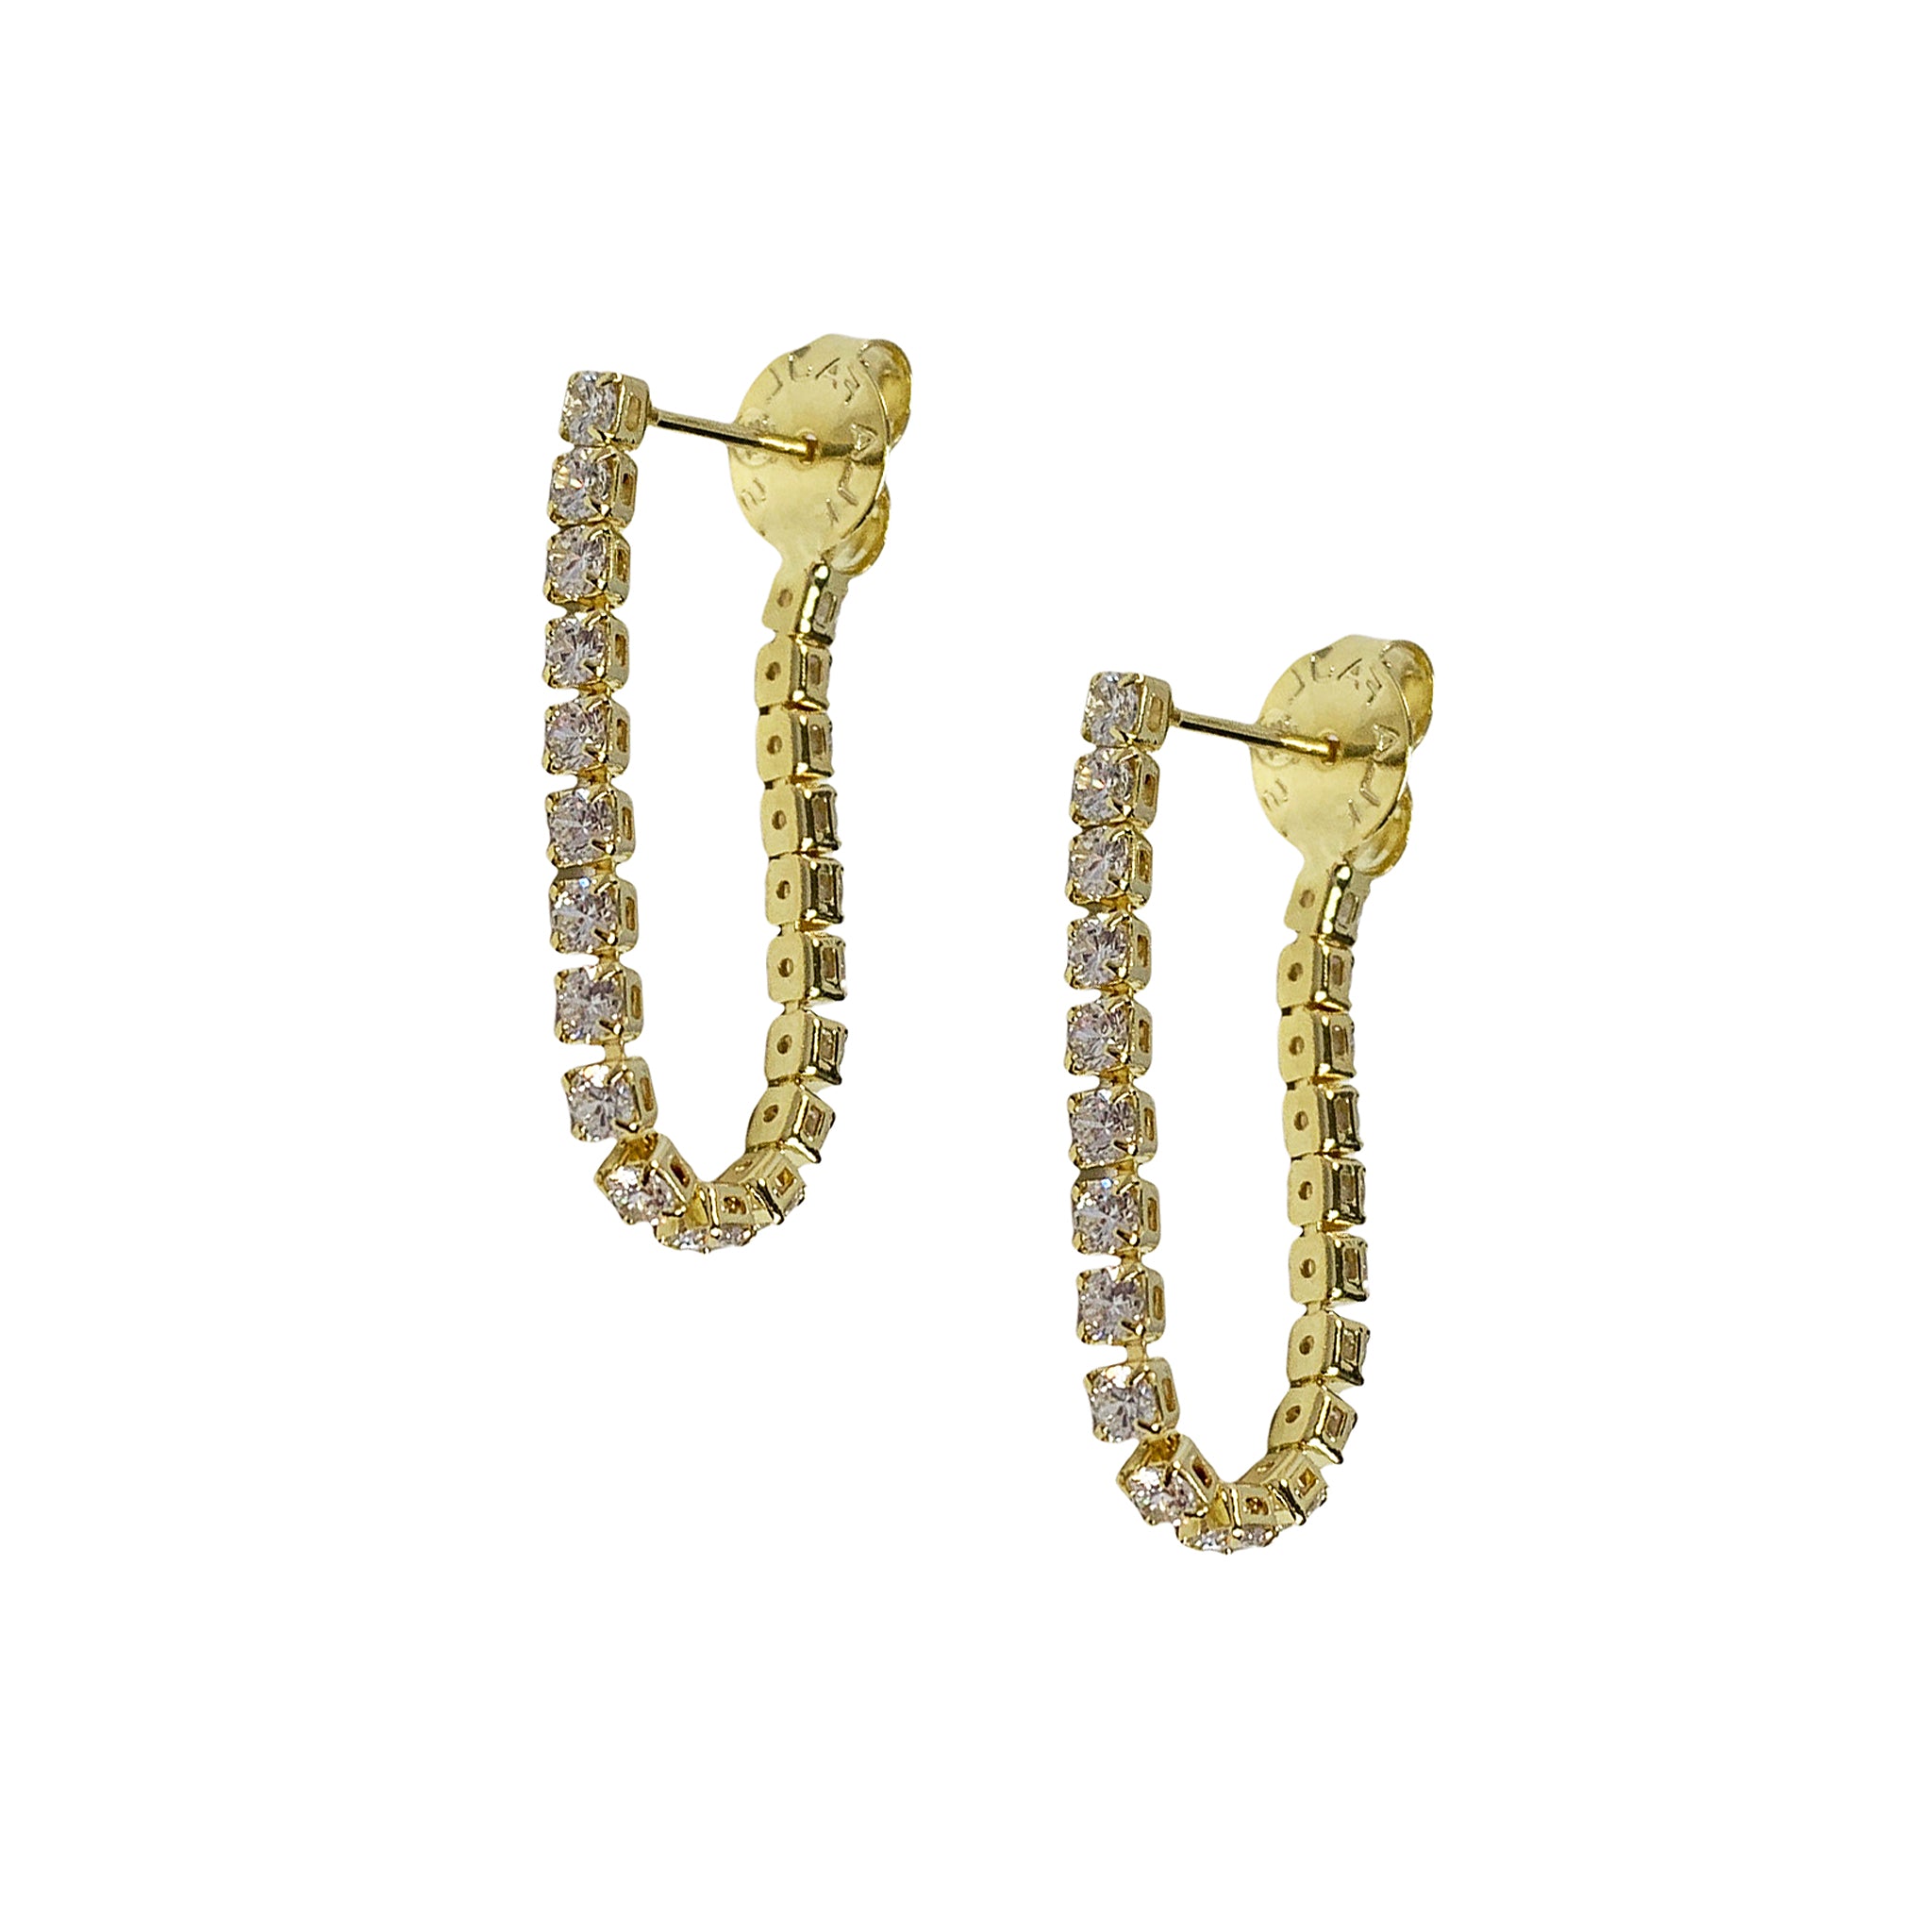 Sheila Fajl Allie Dangle Earrings in Clear Cubic Zirconia and Gold Plated